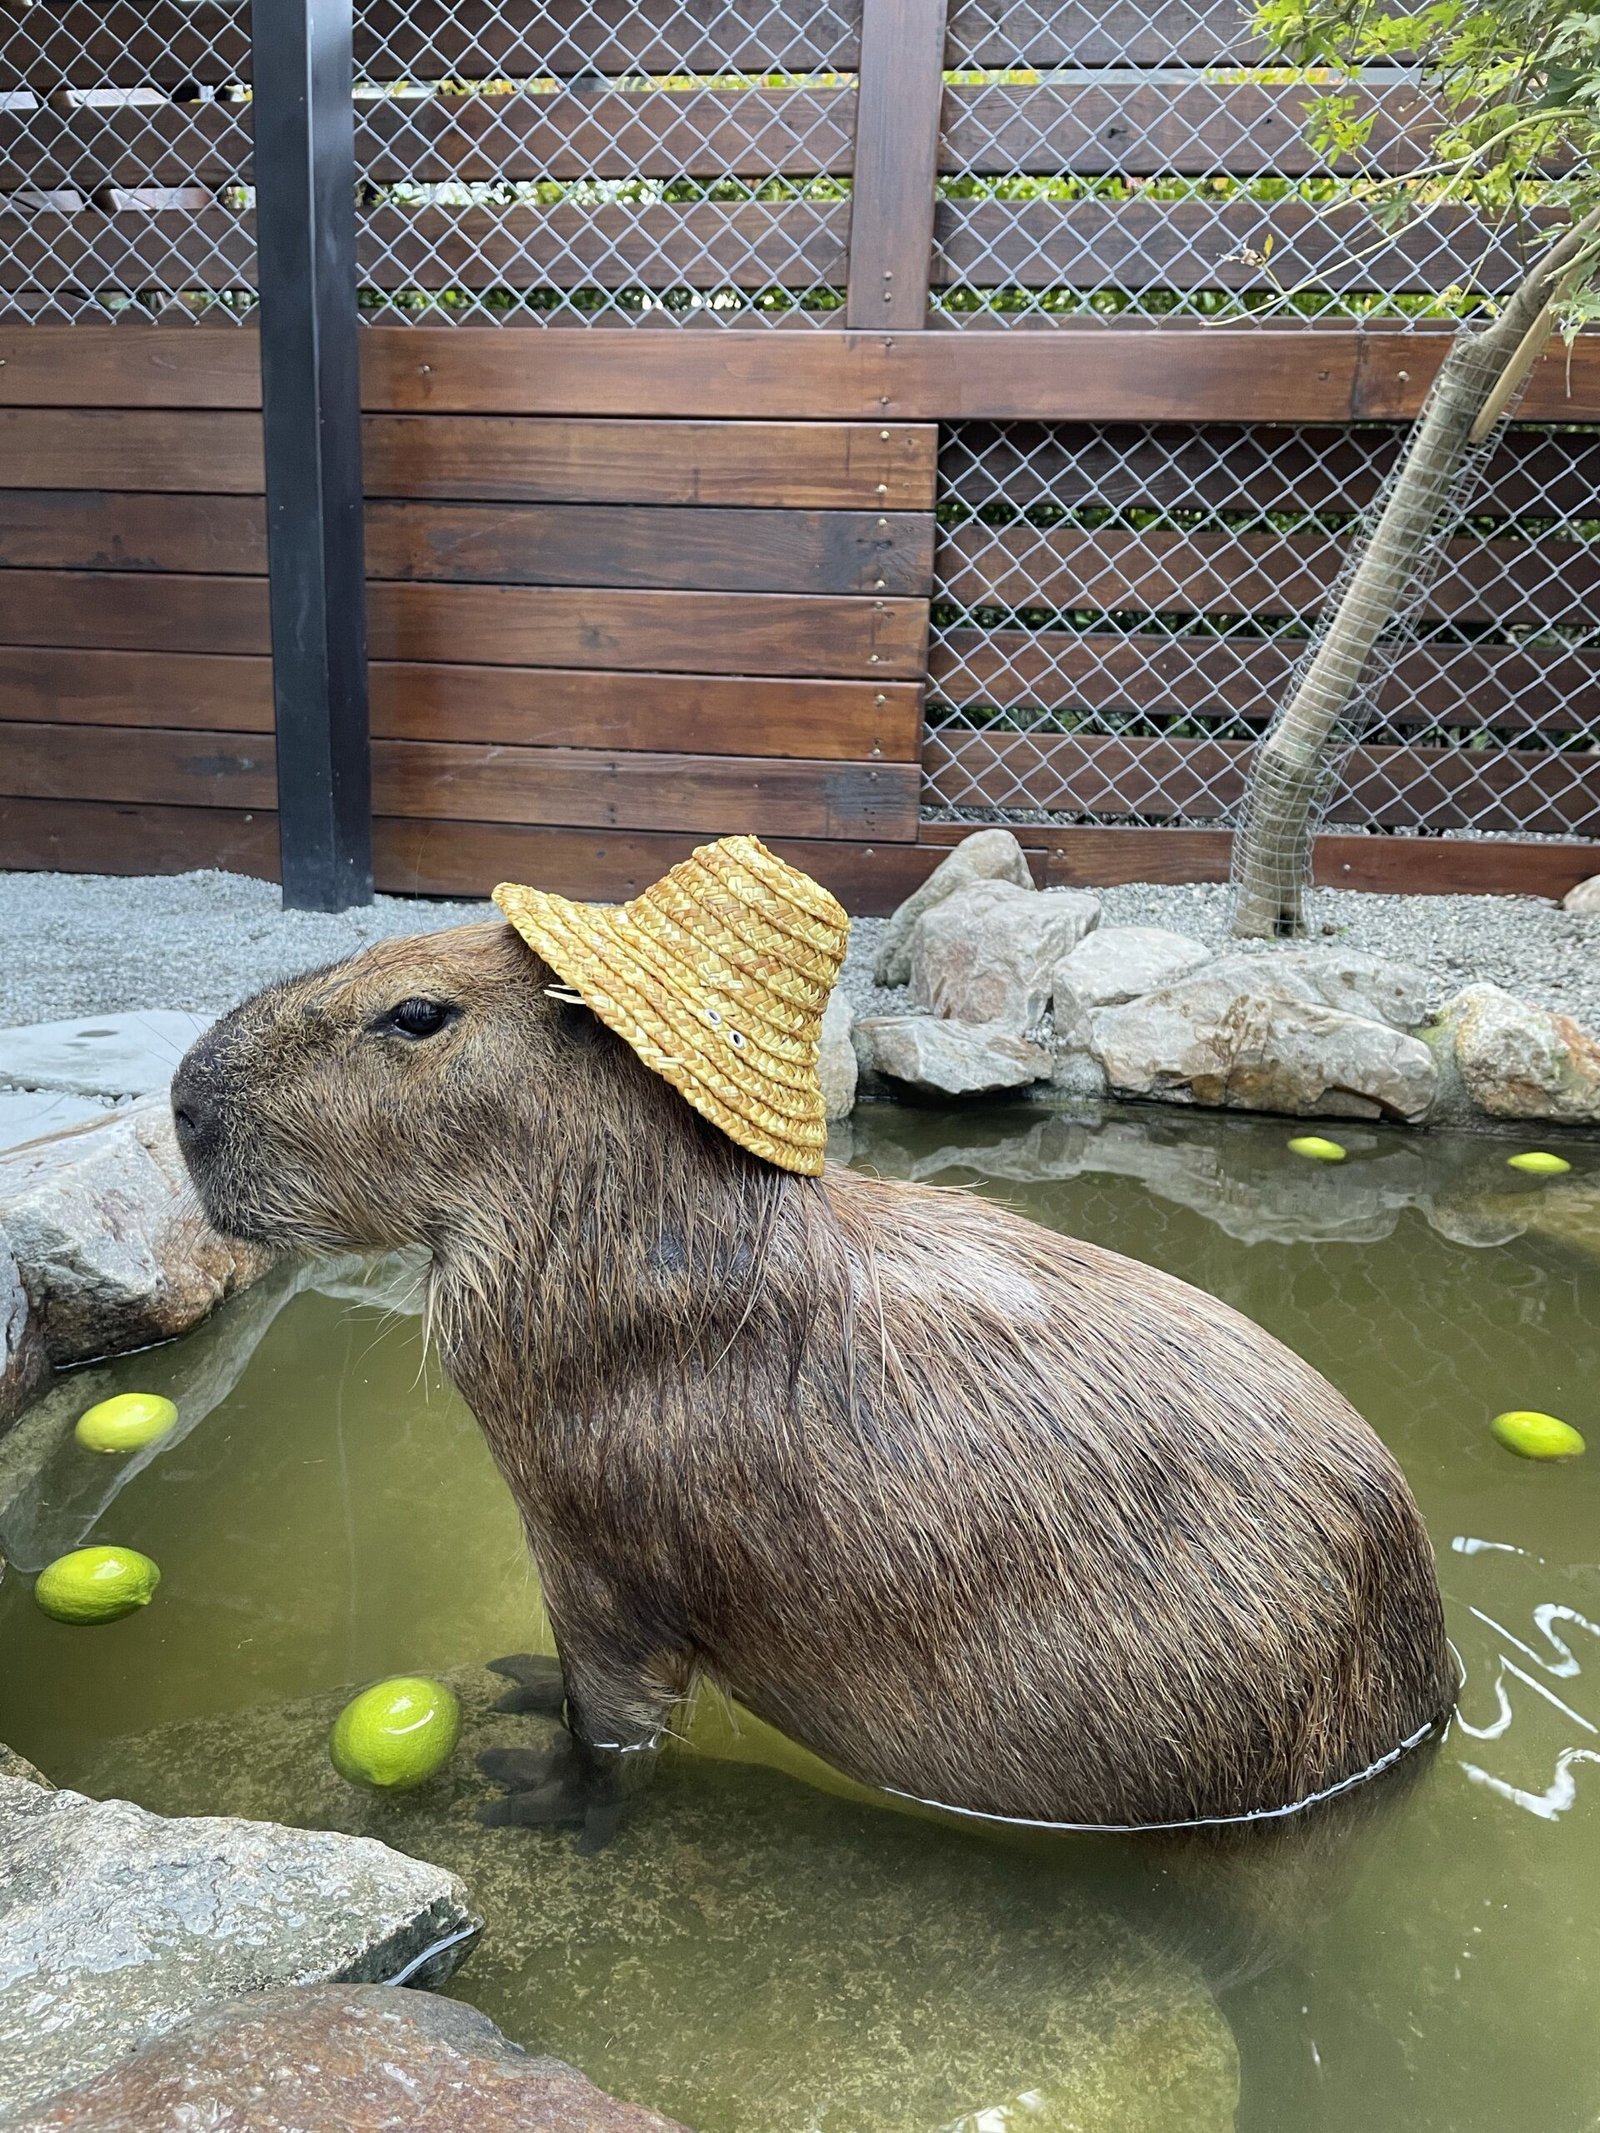 Best Places to Spot Capybaras in the Wild